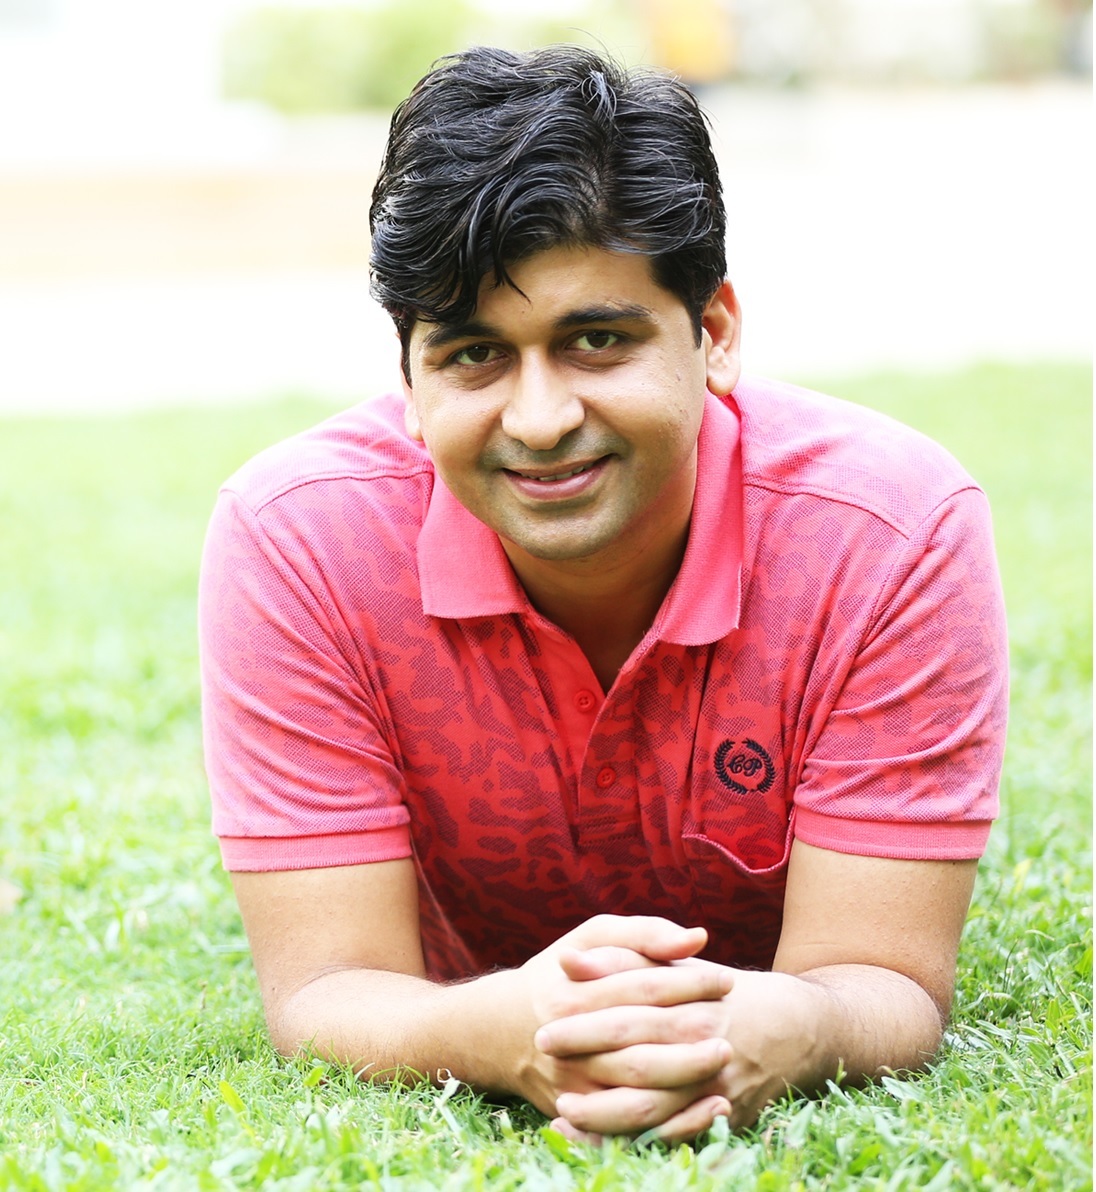 Interview with Ajay K Pandey, author of The Girl in the Red Lipstick